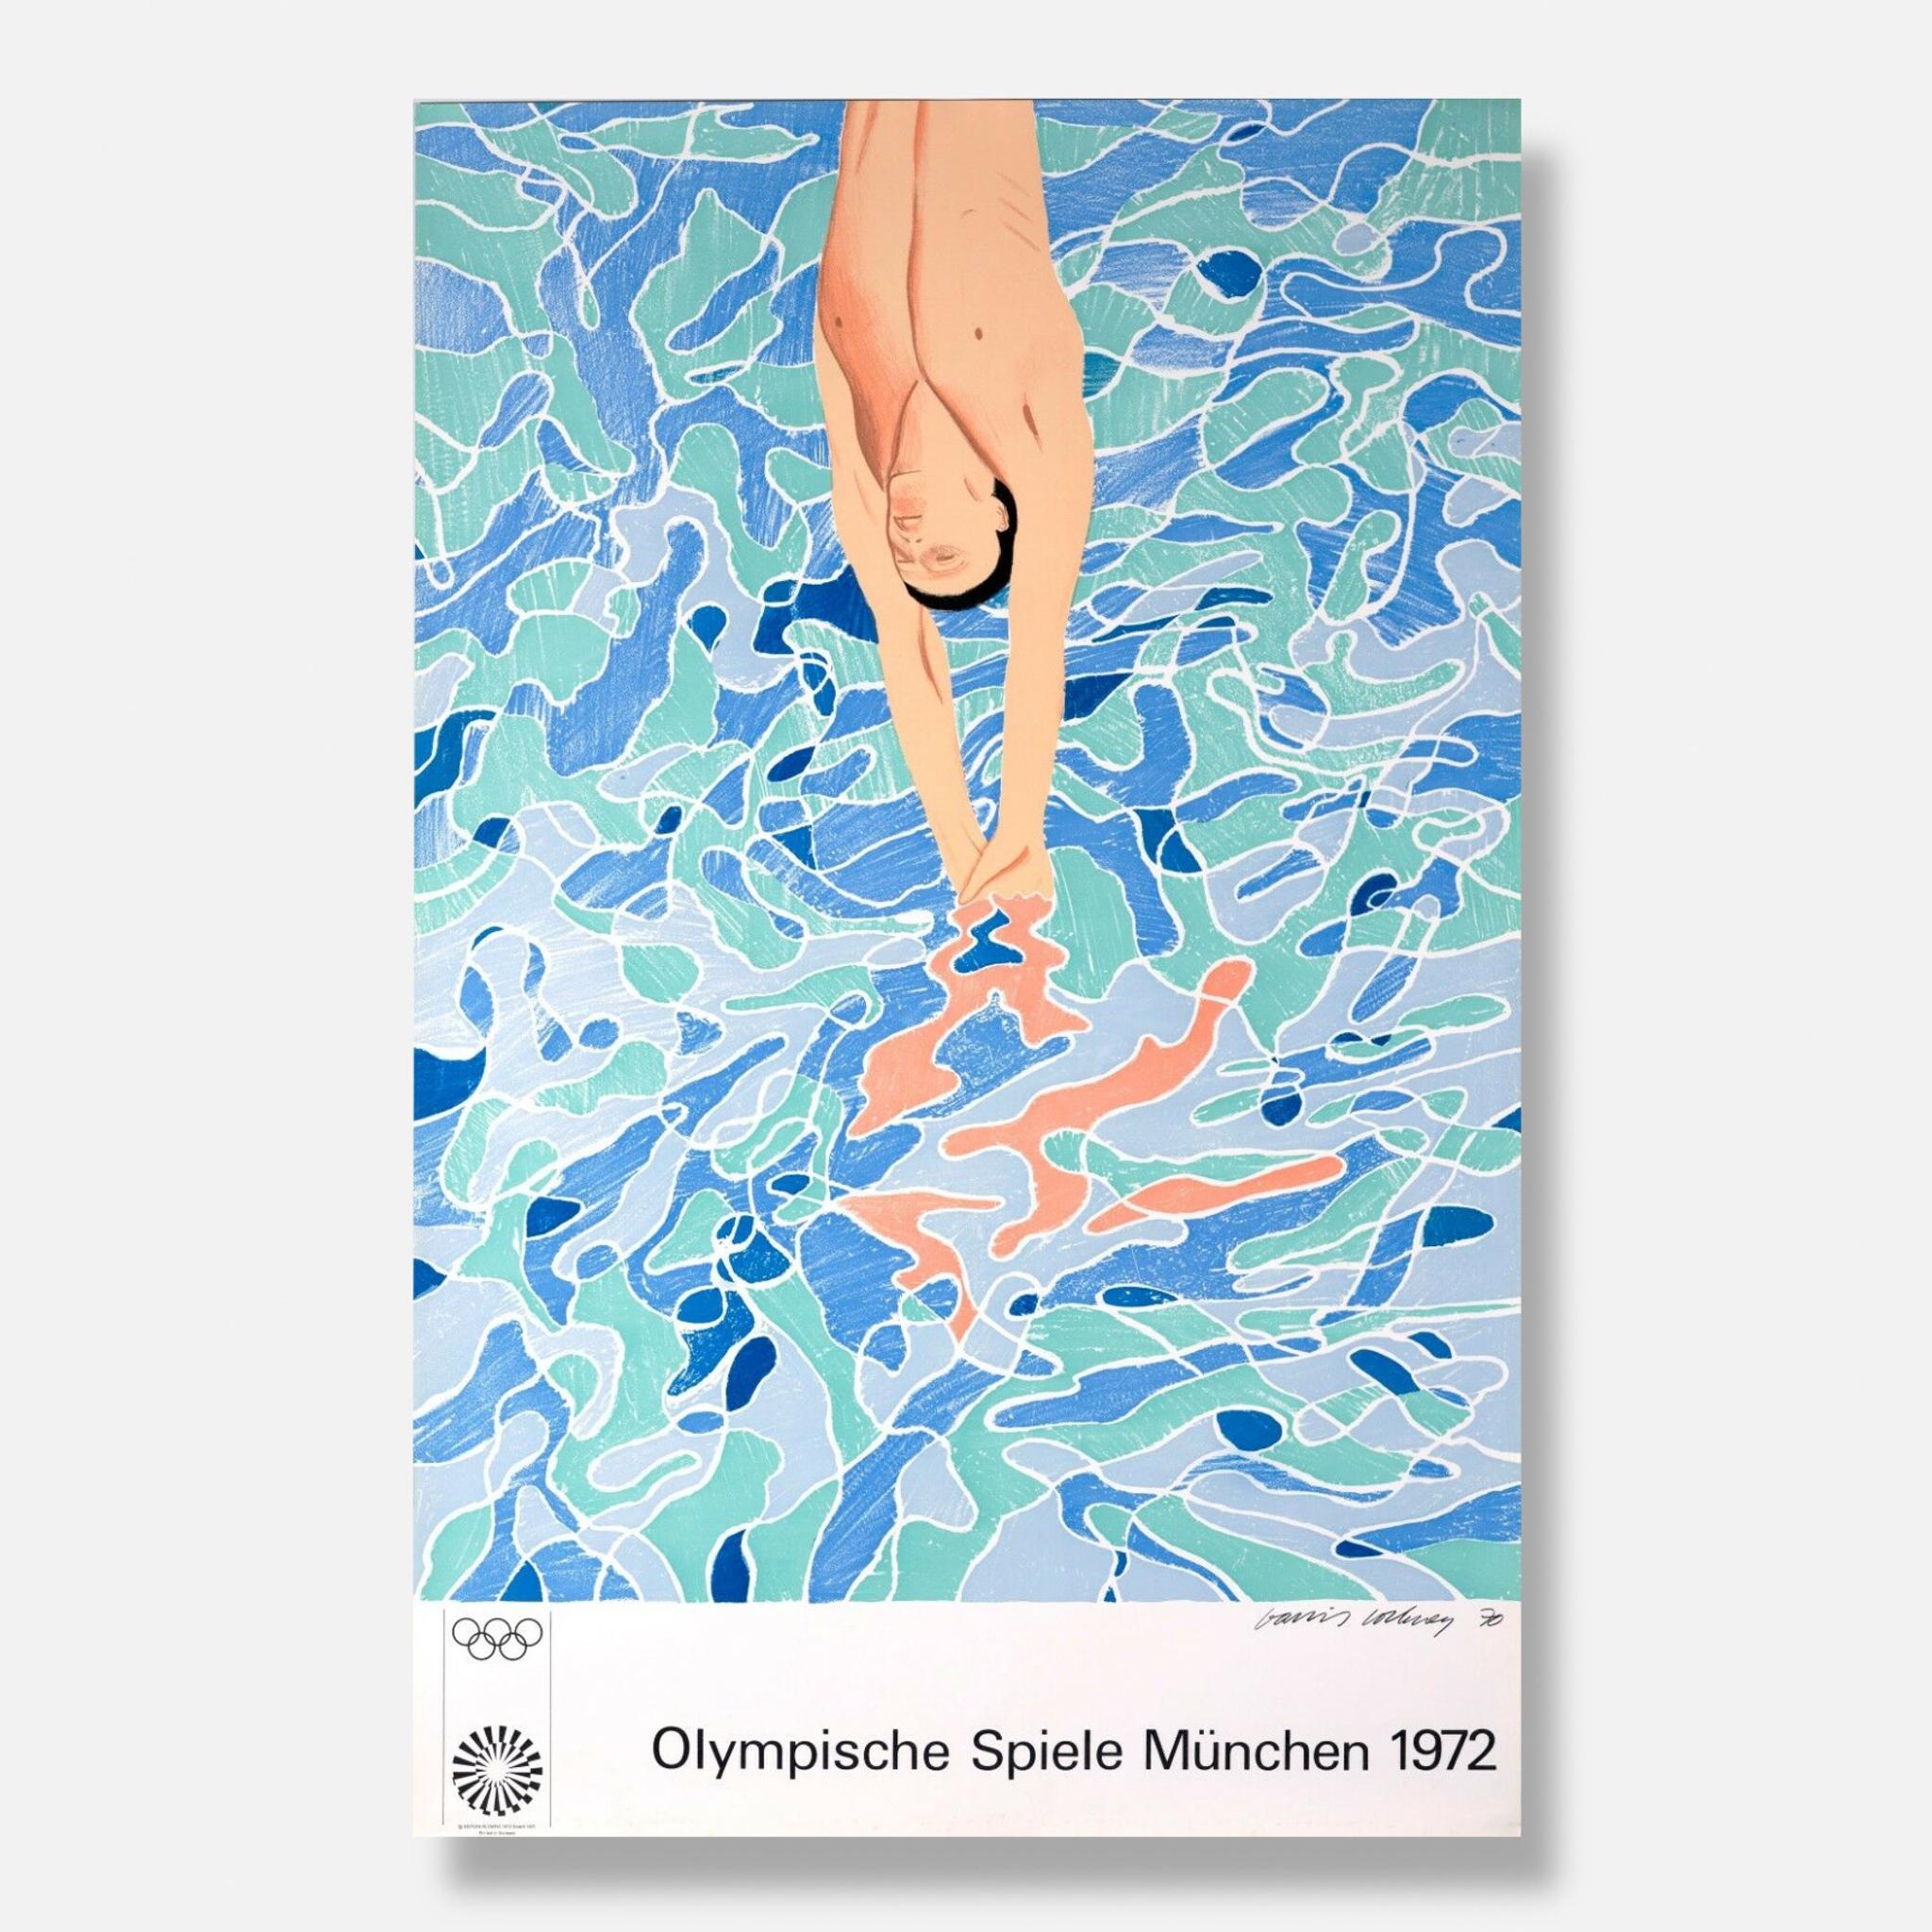 David Hockney Figurative Print - The Diver - Olympic Games 1972 Munich - Original Poster - Edition Olympia Print